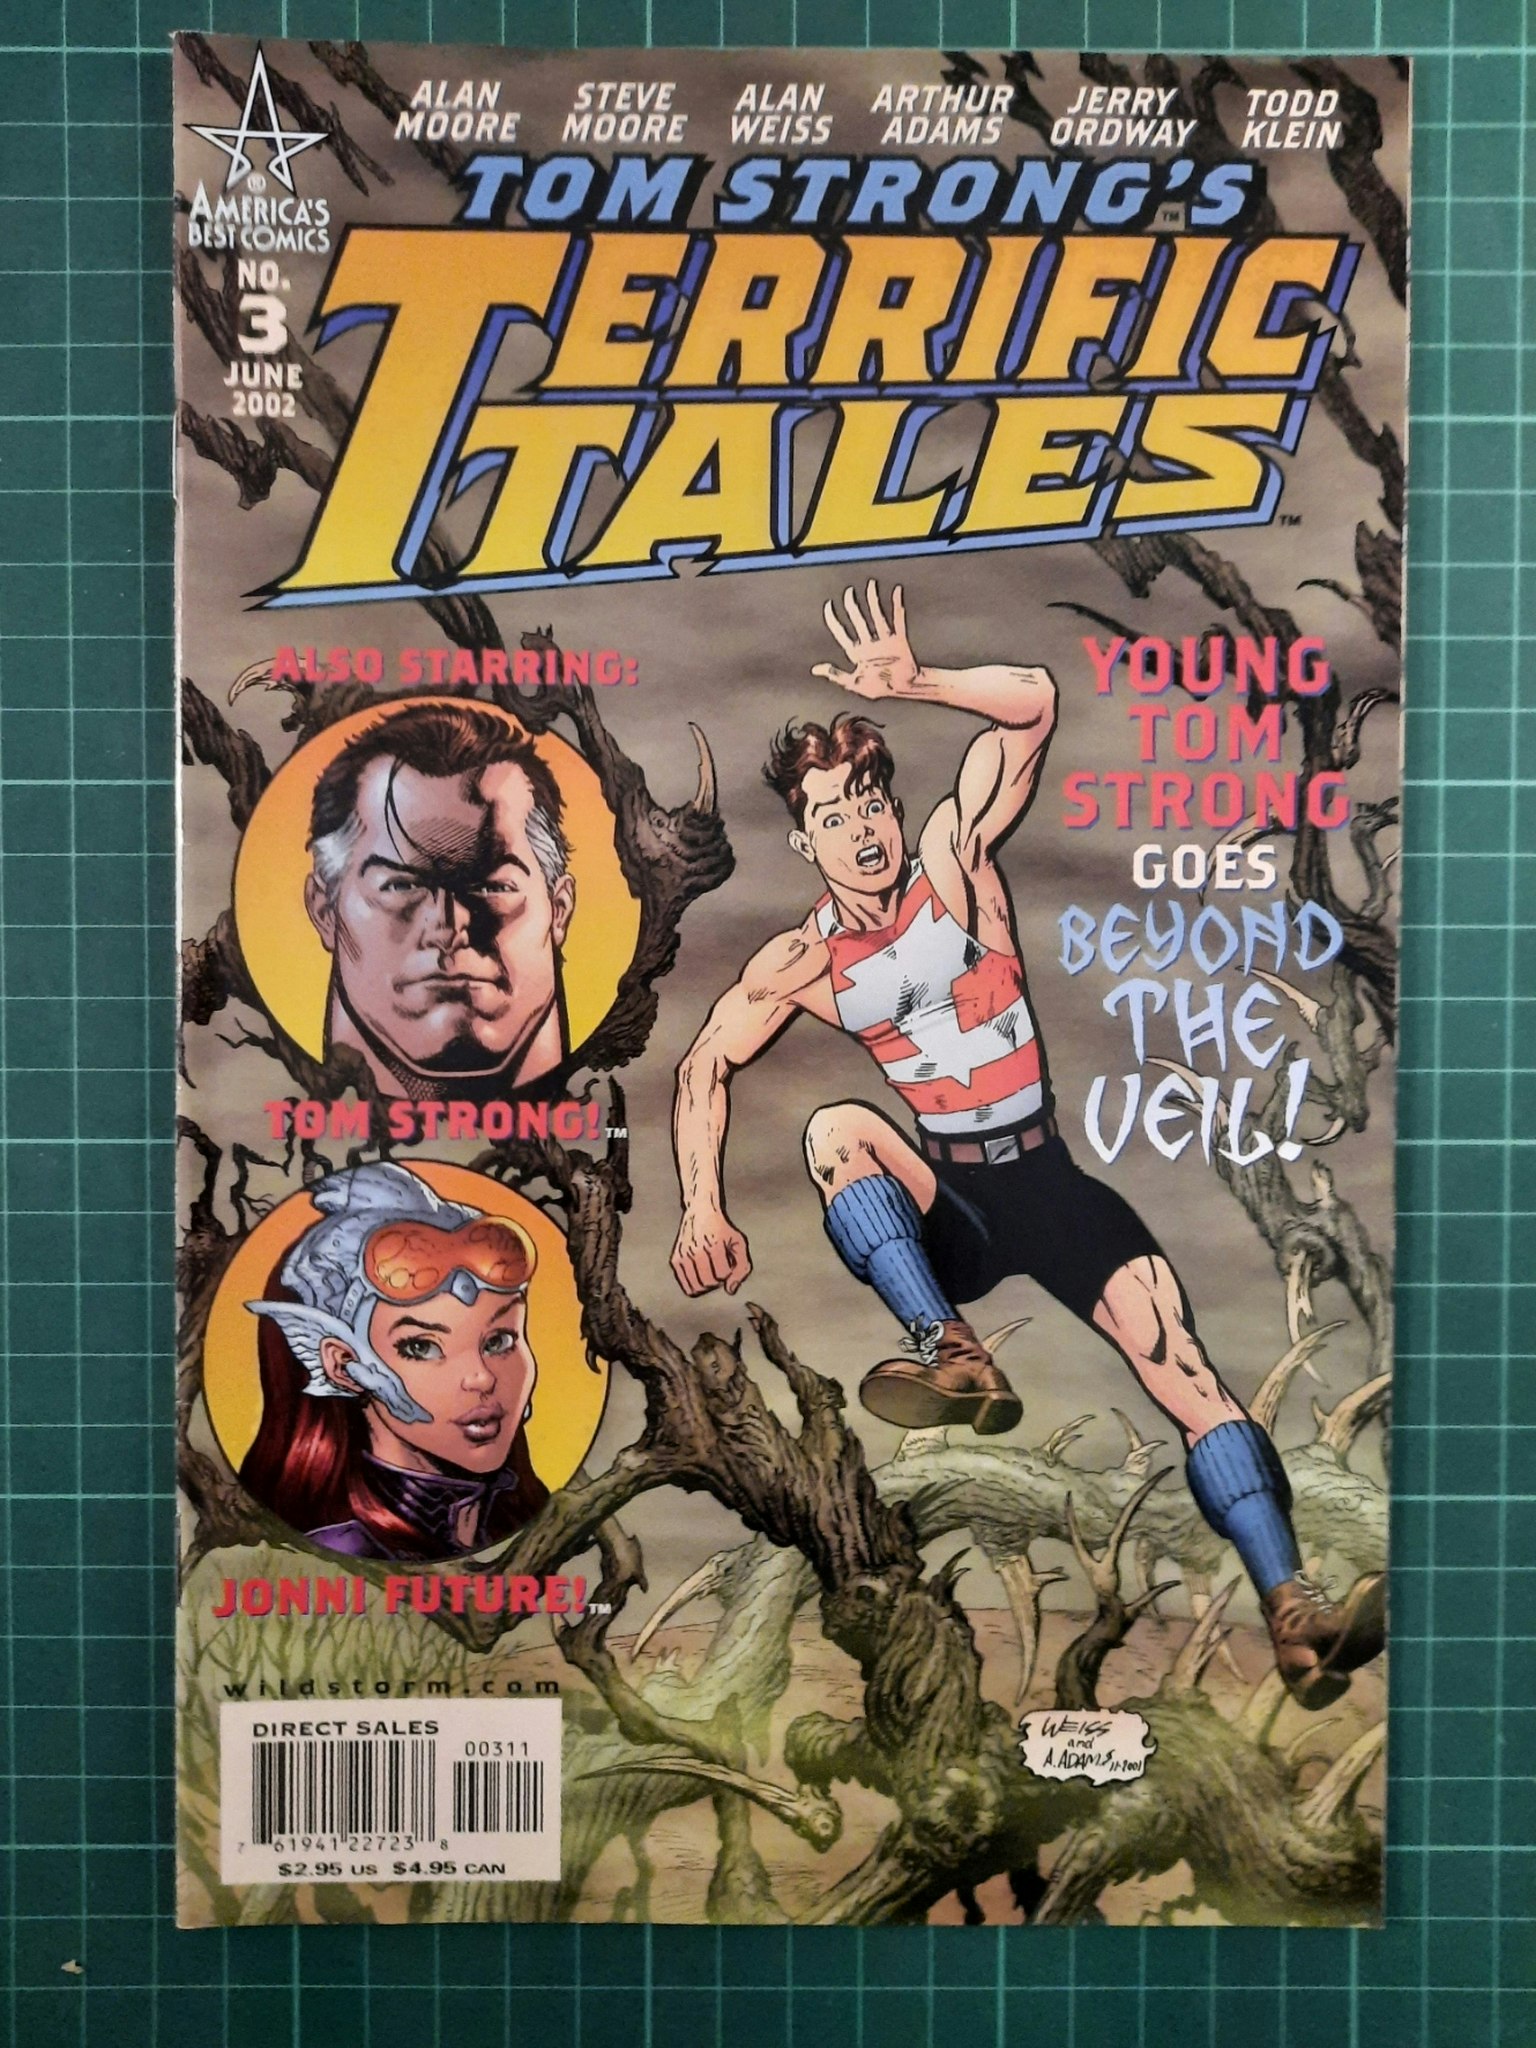 Tom Strong's Terrific tales #03